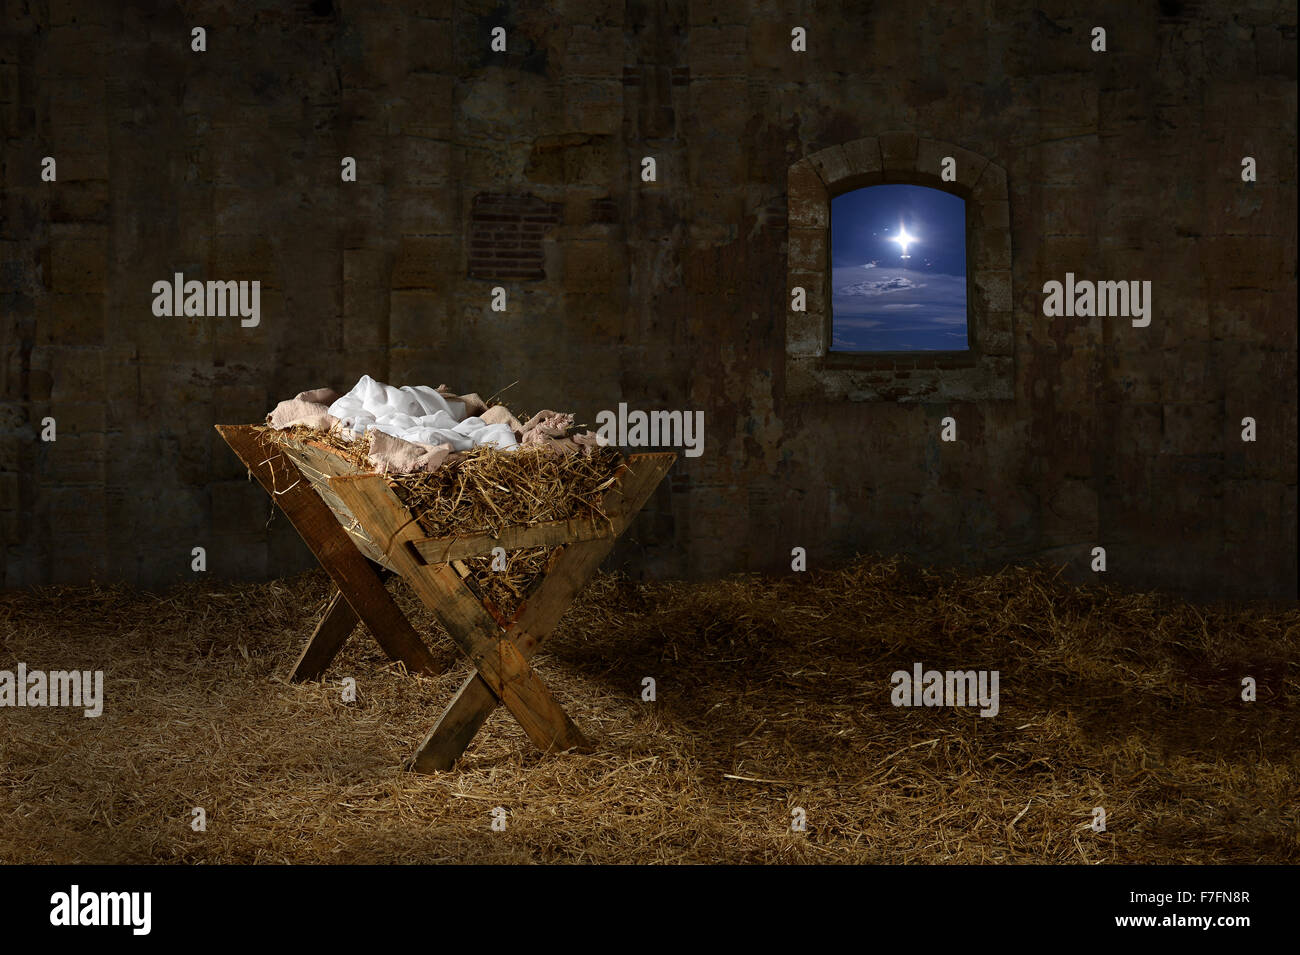 Manger in barn with window showing Christmas star Stock Photo